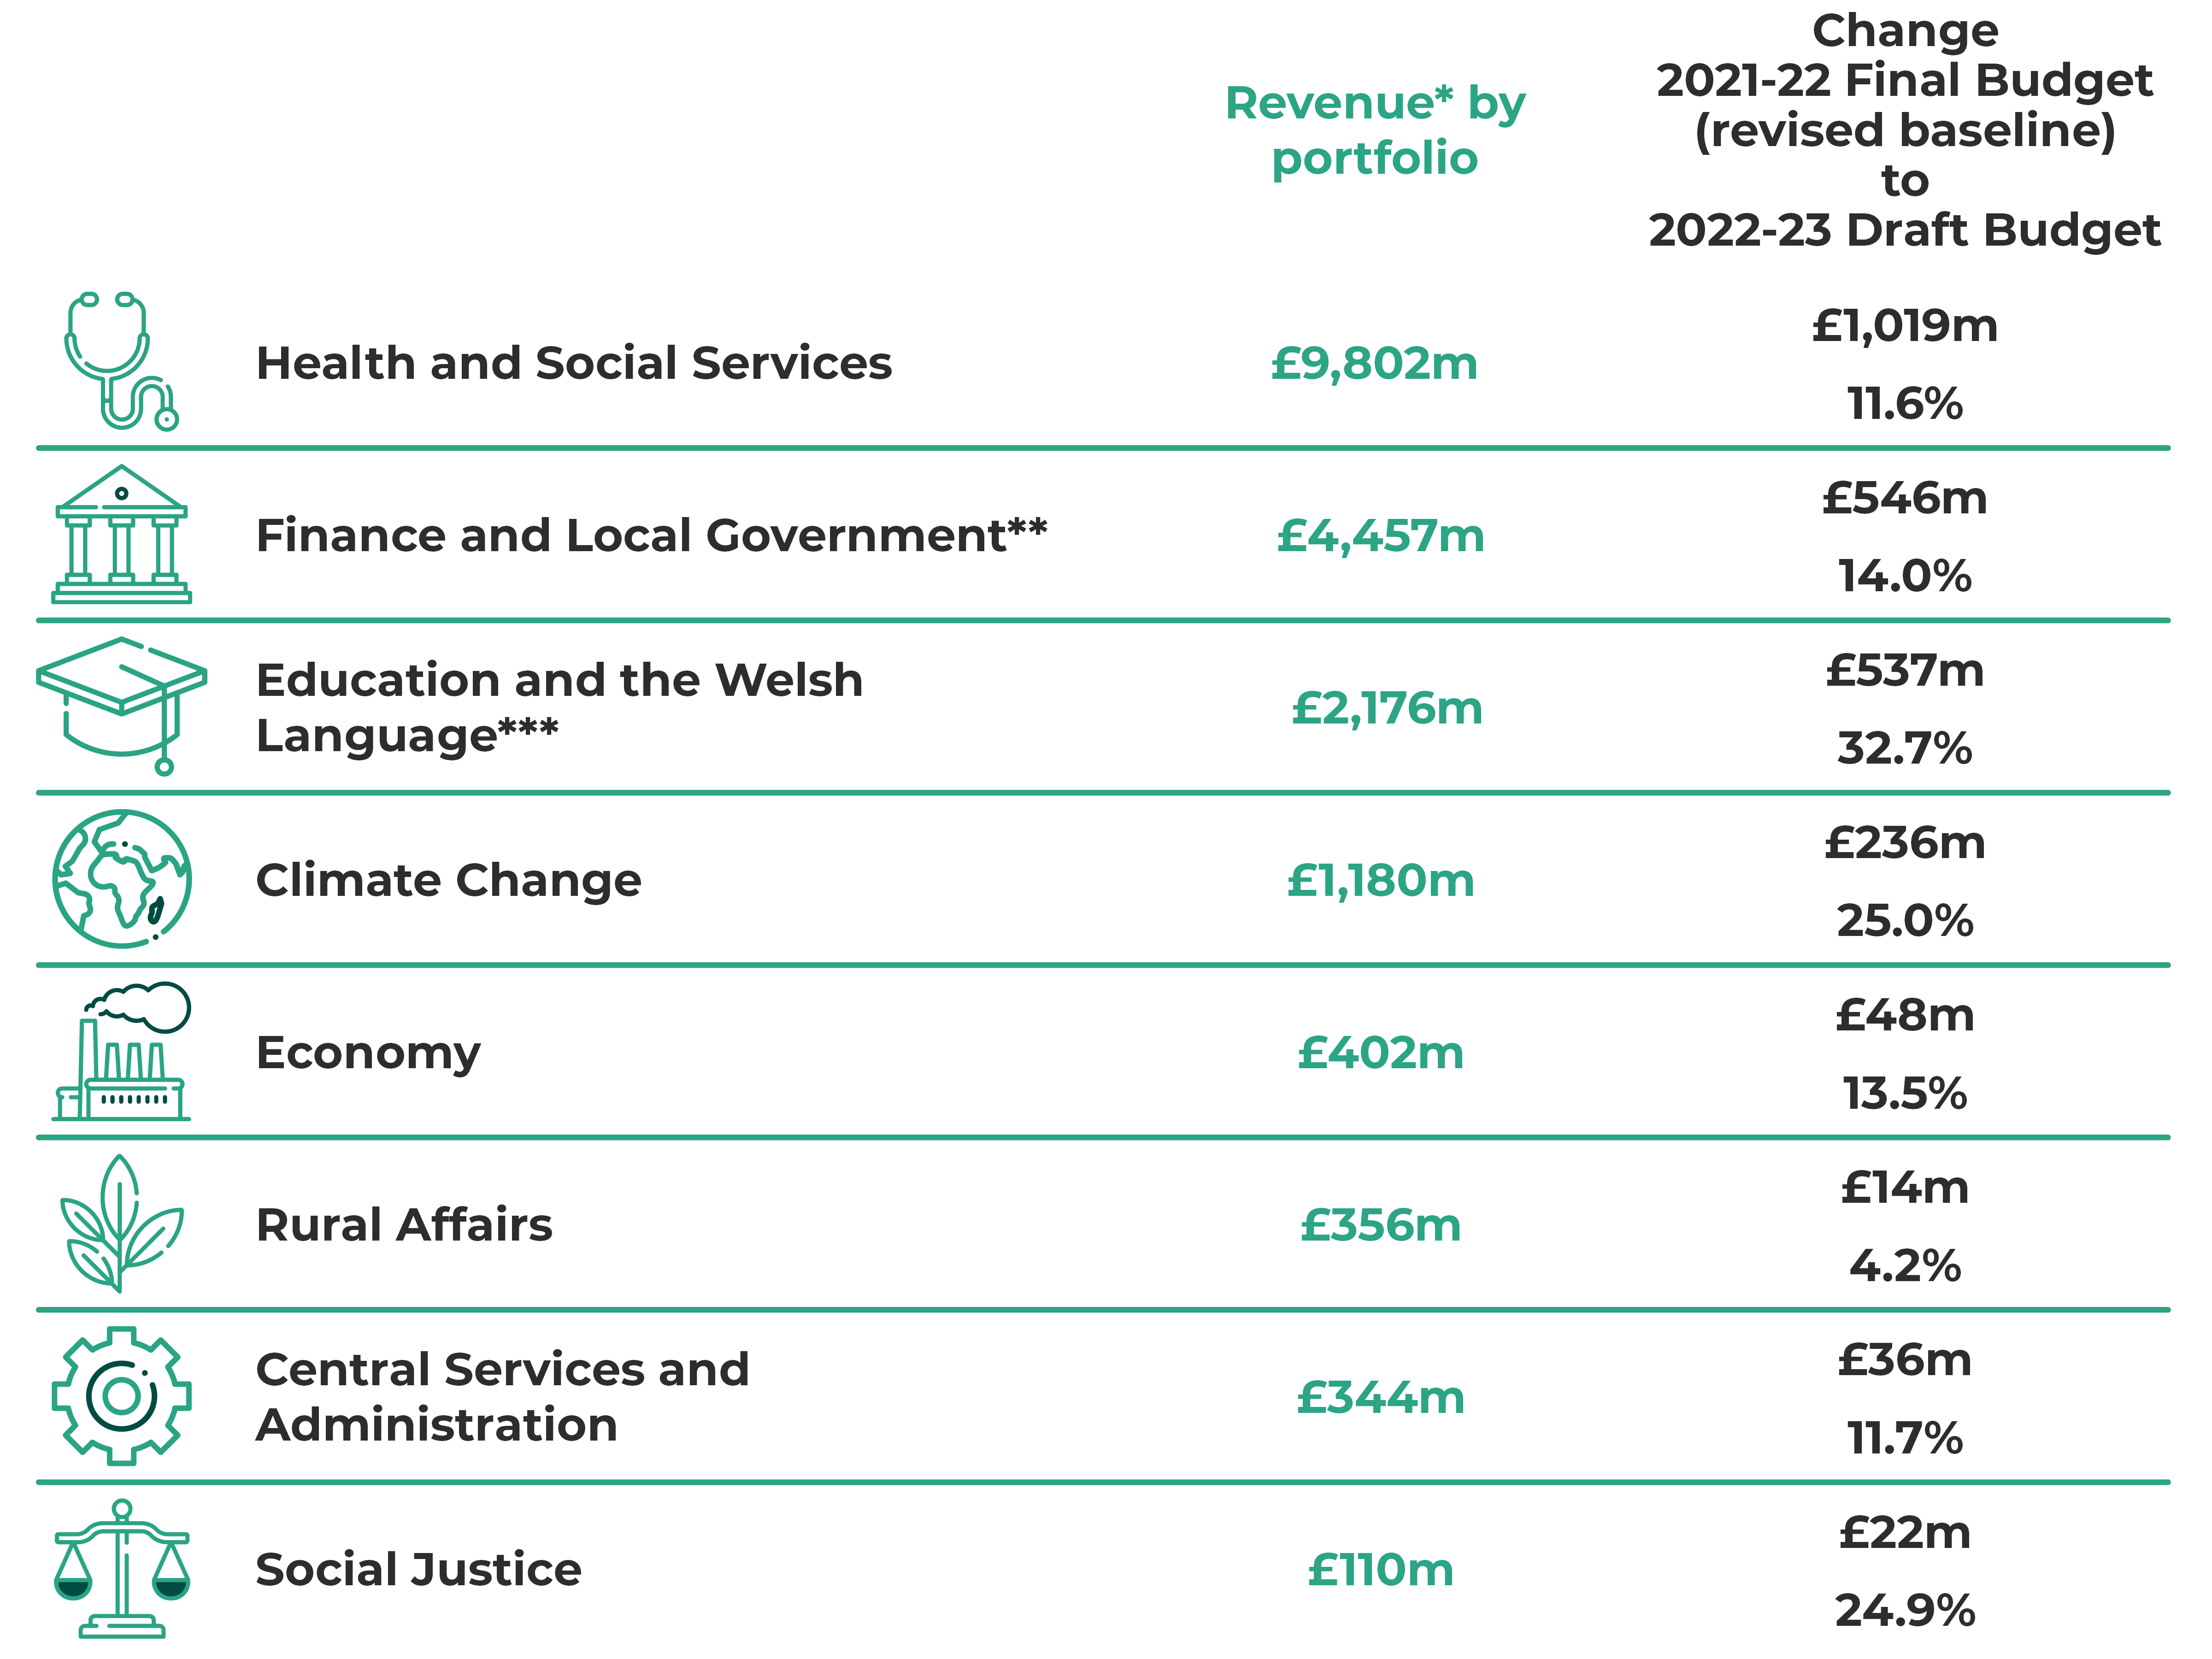 2022-23 Draft Budget revenue by portfolio and changes from 2021-22 Final Budget (revised baseline). Health and Social Services £9802m, up £1019m. Finance and Local Government £4457m, up £546m. Education and the Welsh Language £2176m, up £537m. Climate Change £1180m, up £236m. Economy £402m, up £48m. Rural Affairs £356m, up £14m. Central Services and Administration £344m, up £36m. Social Justice £110m, up £22m